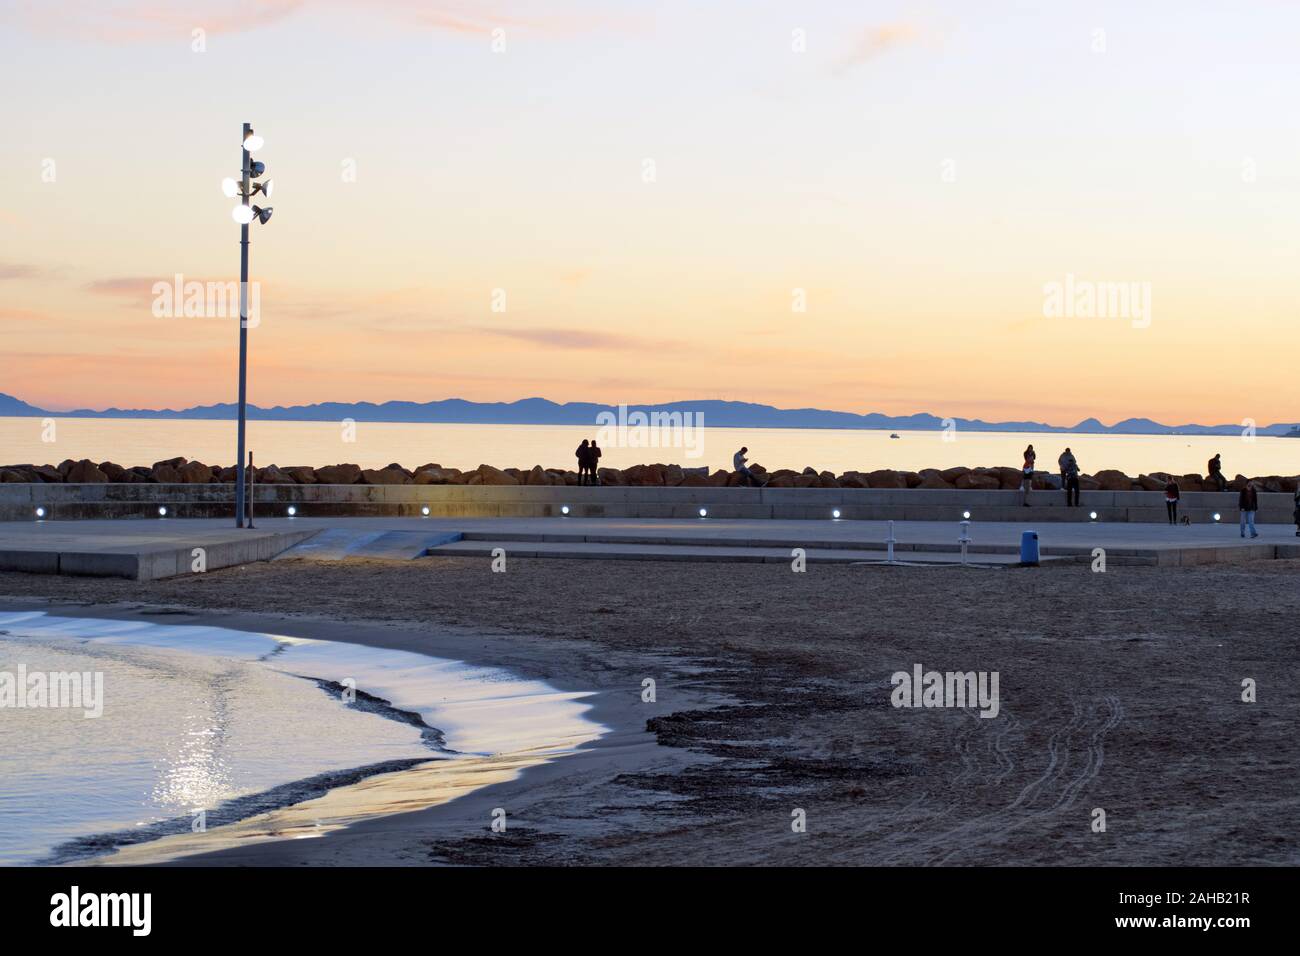 Torrevieja, Spain, December 26, 2019: Beach of Torrevieja during sunrise. People walking outdoors enjoy the view Stock Photo